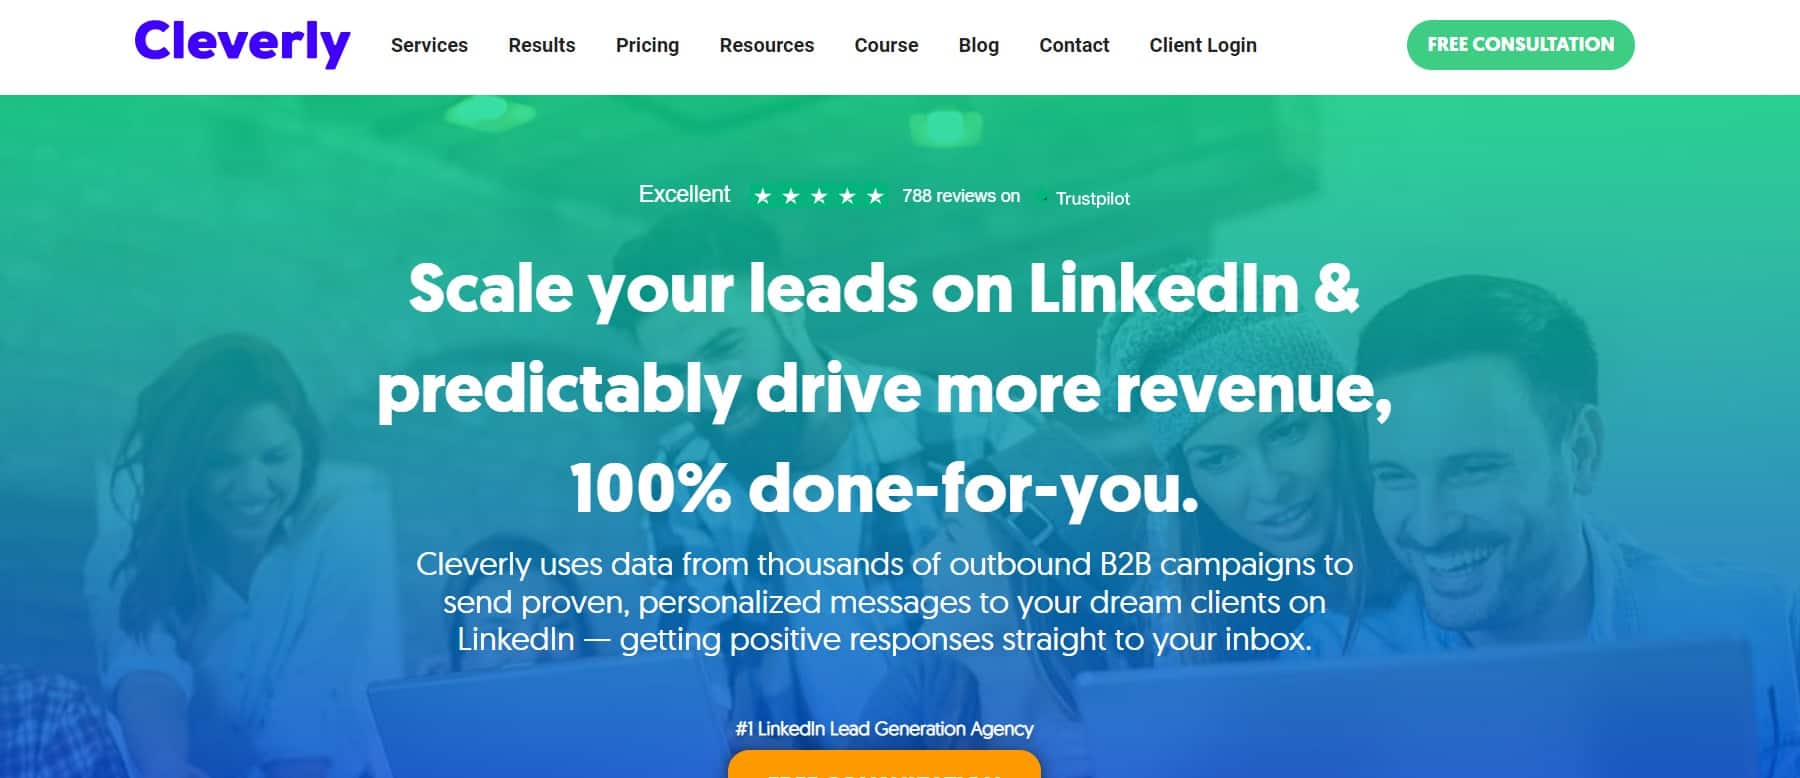 cleverly 1 linkedin lead generation agency done for you